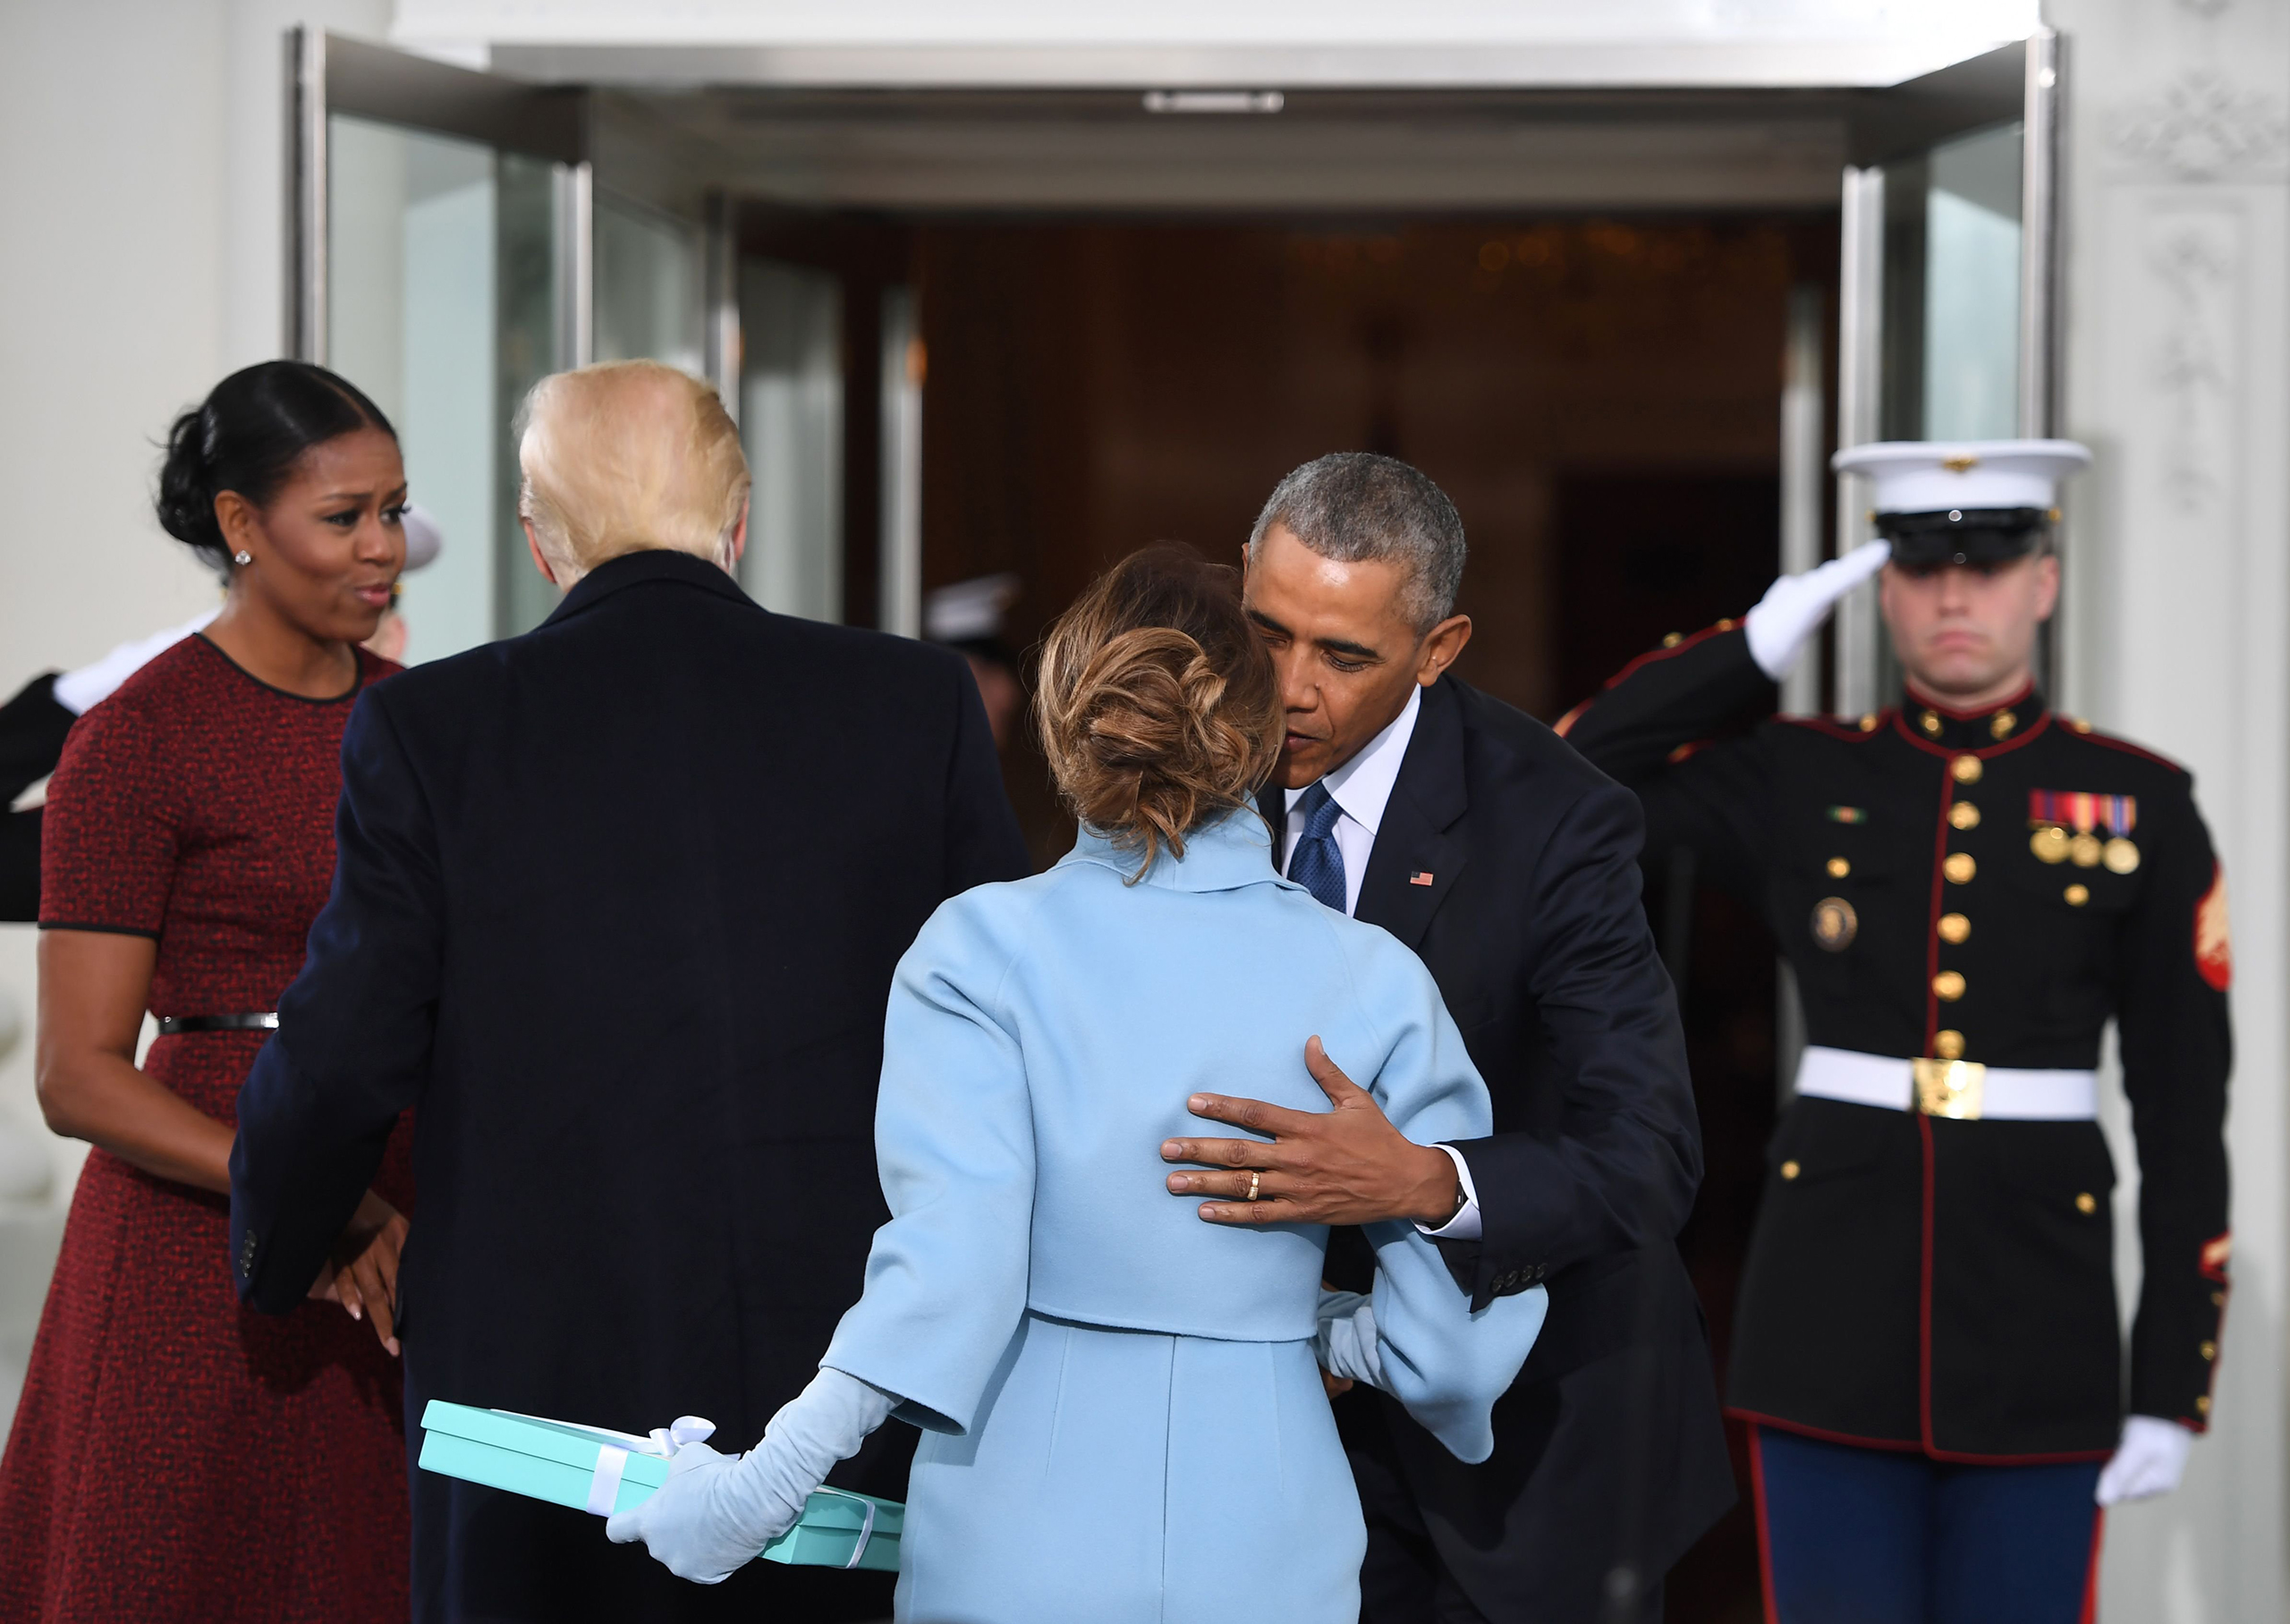 Melania Trump, bearing a gift from Tiffany &amp; Co., greets President Obama before President Trump's swearing-in ceremony. (Jim Watson—AFP/Getty Images)